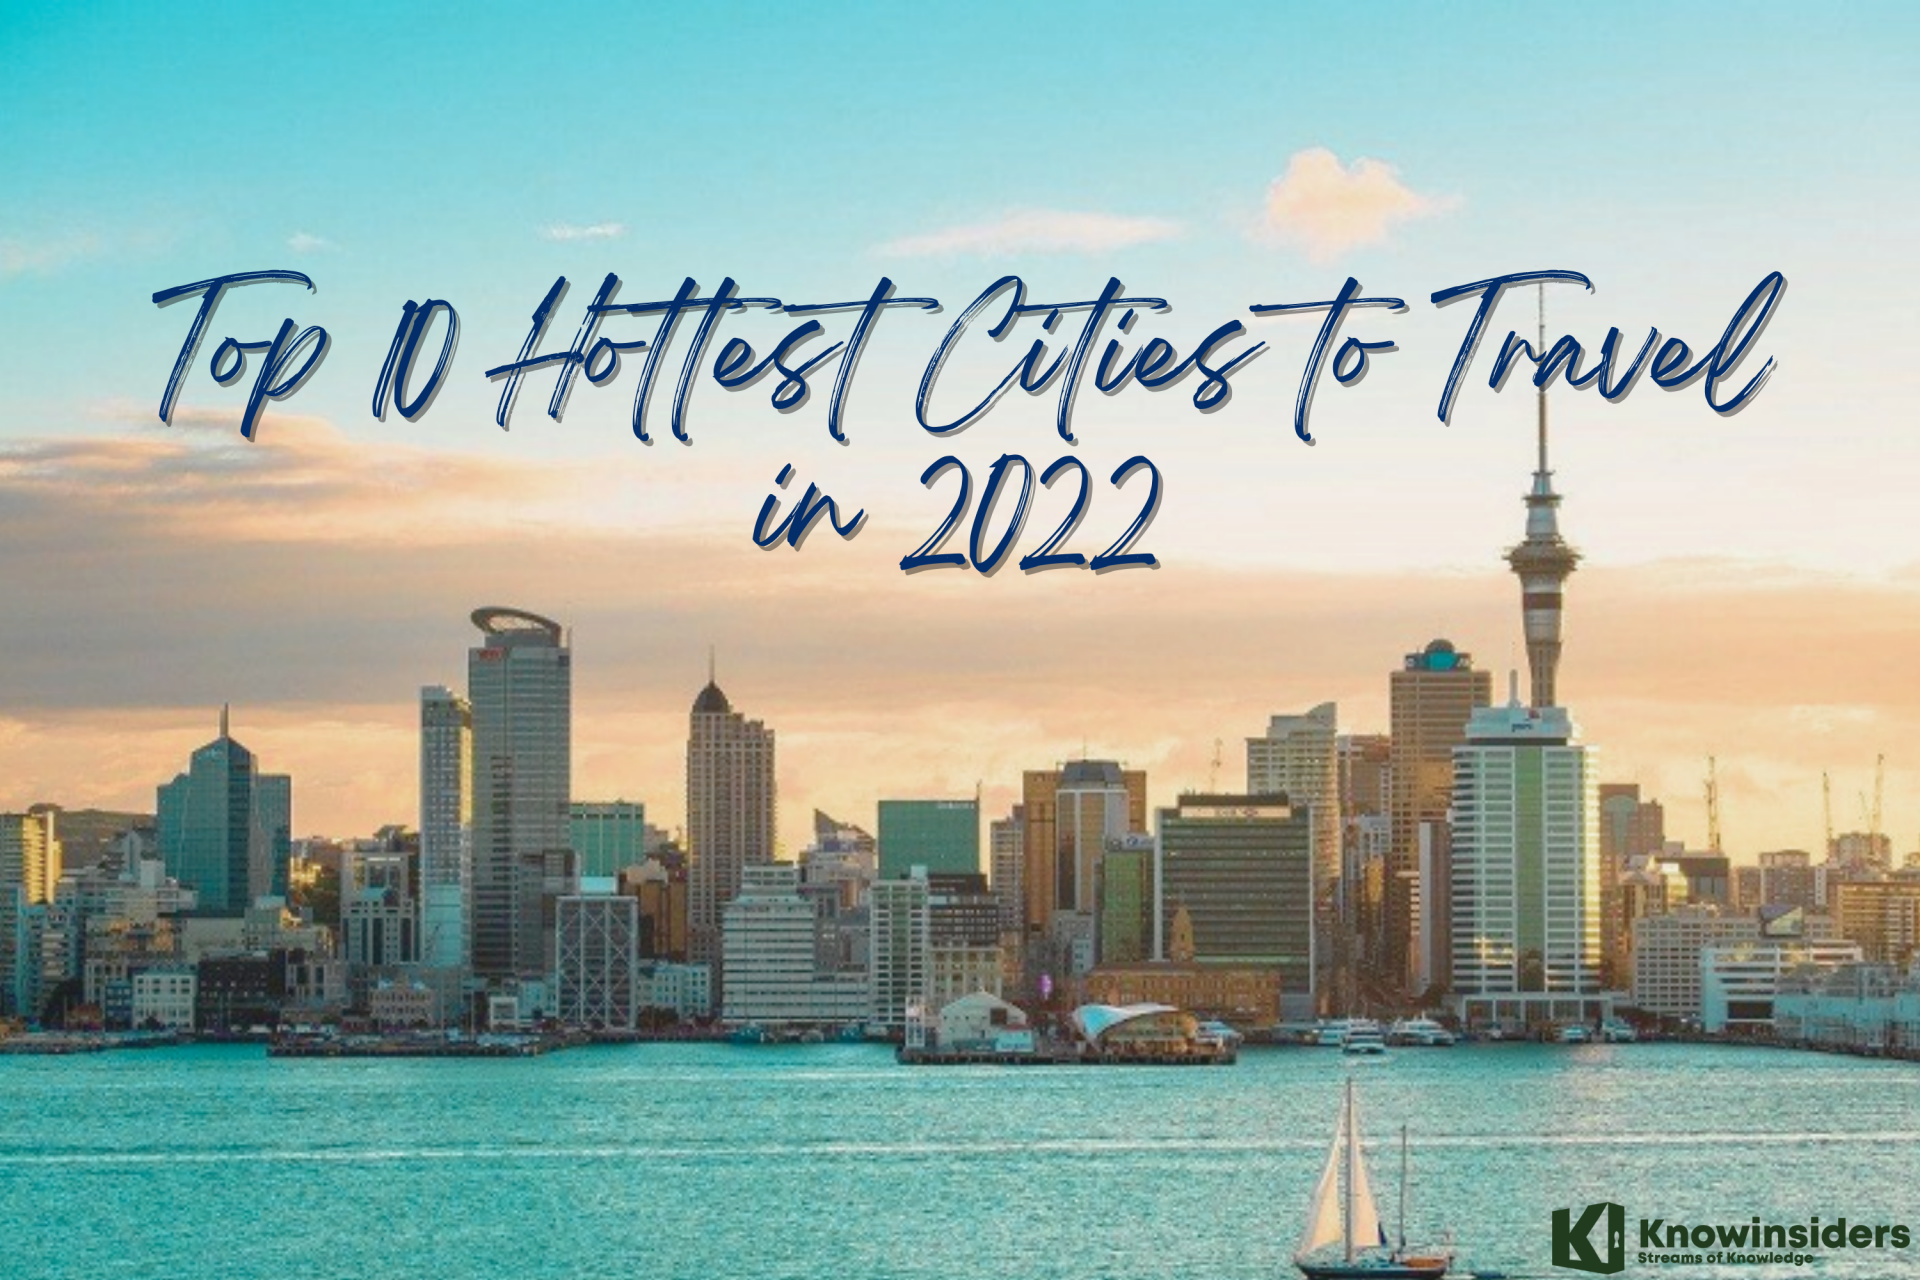 10 Hottest Cities To Travel Around The World in 2022